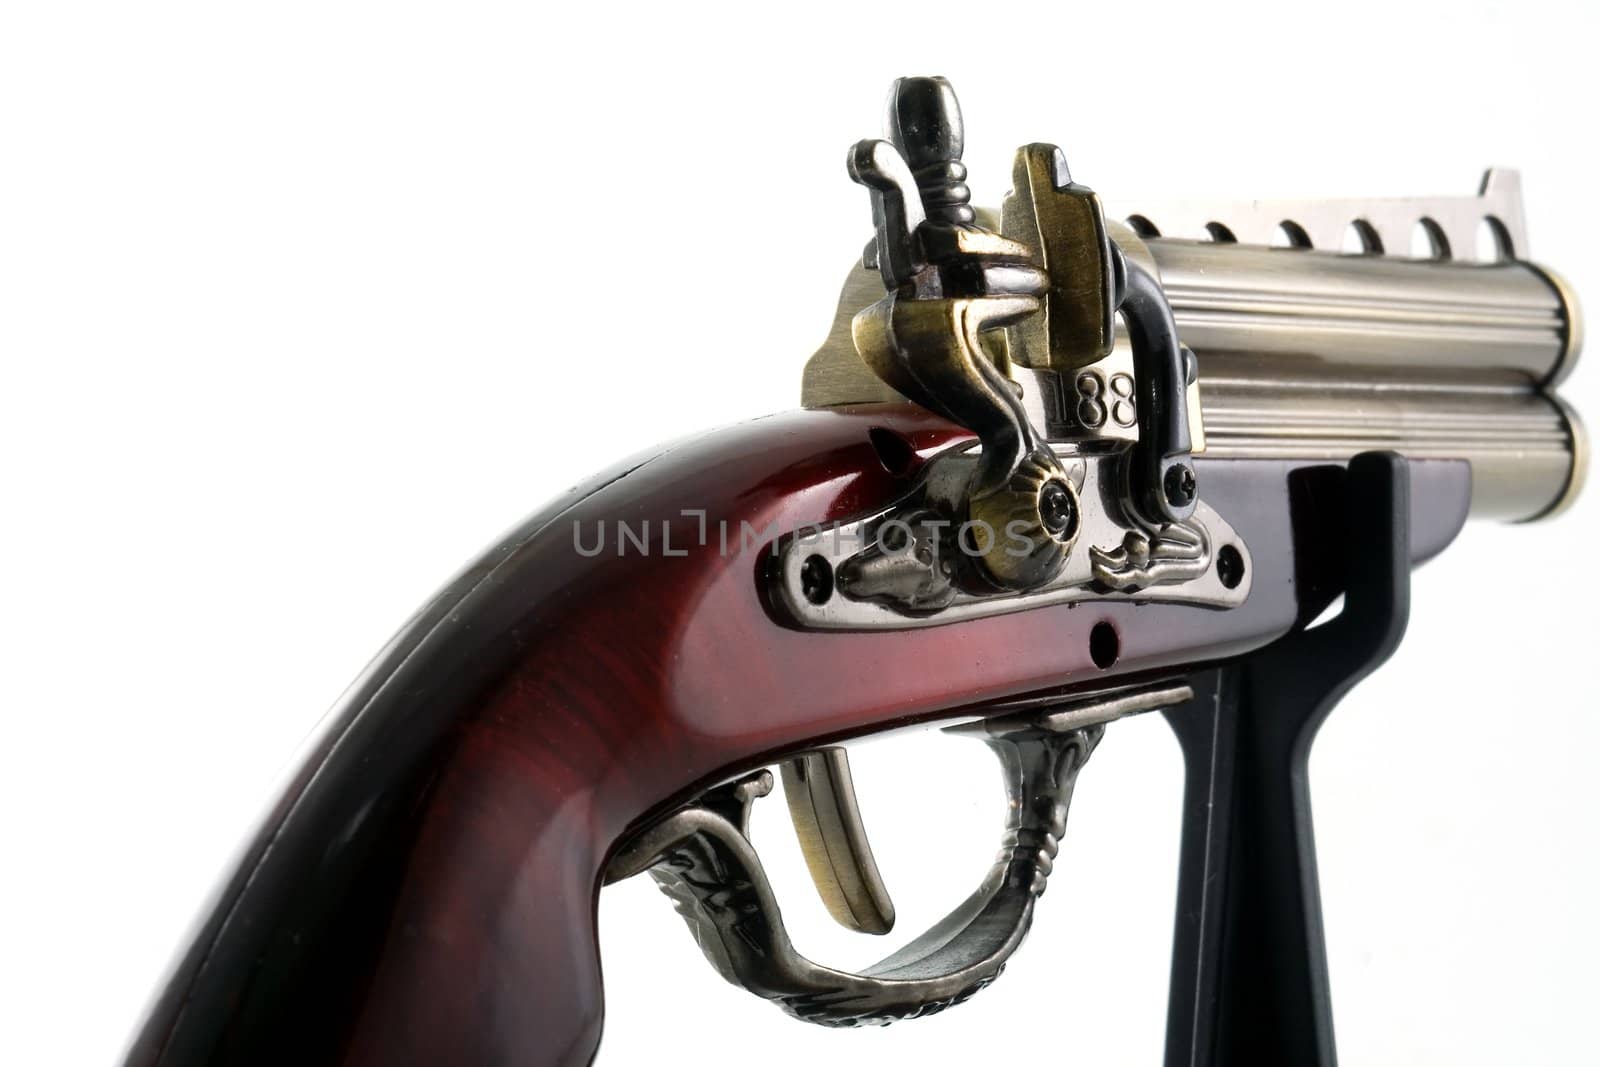 Desktop model of an ancient pistol on white background. Isolated object.